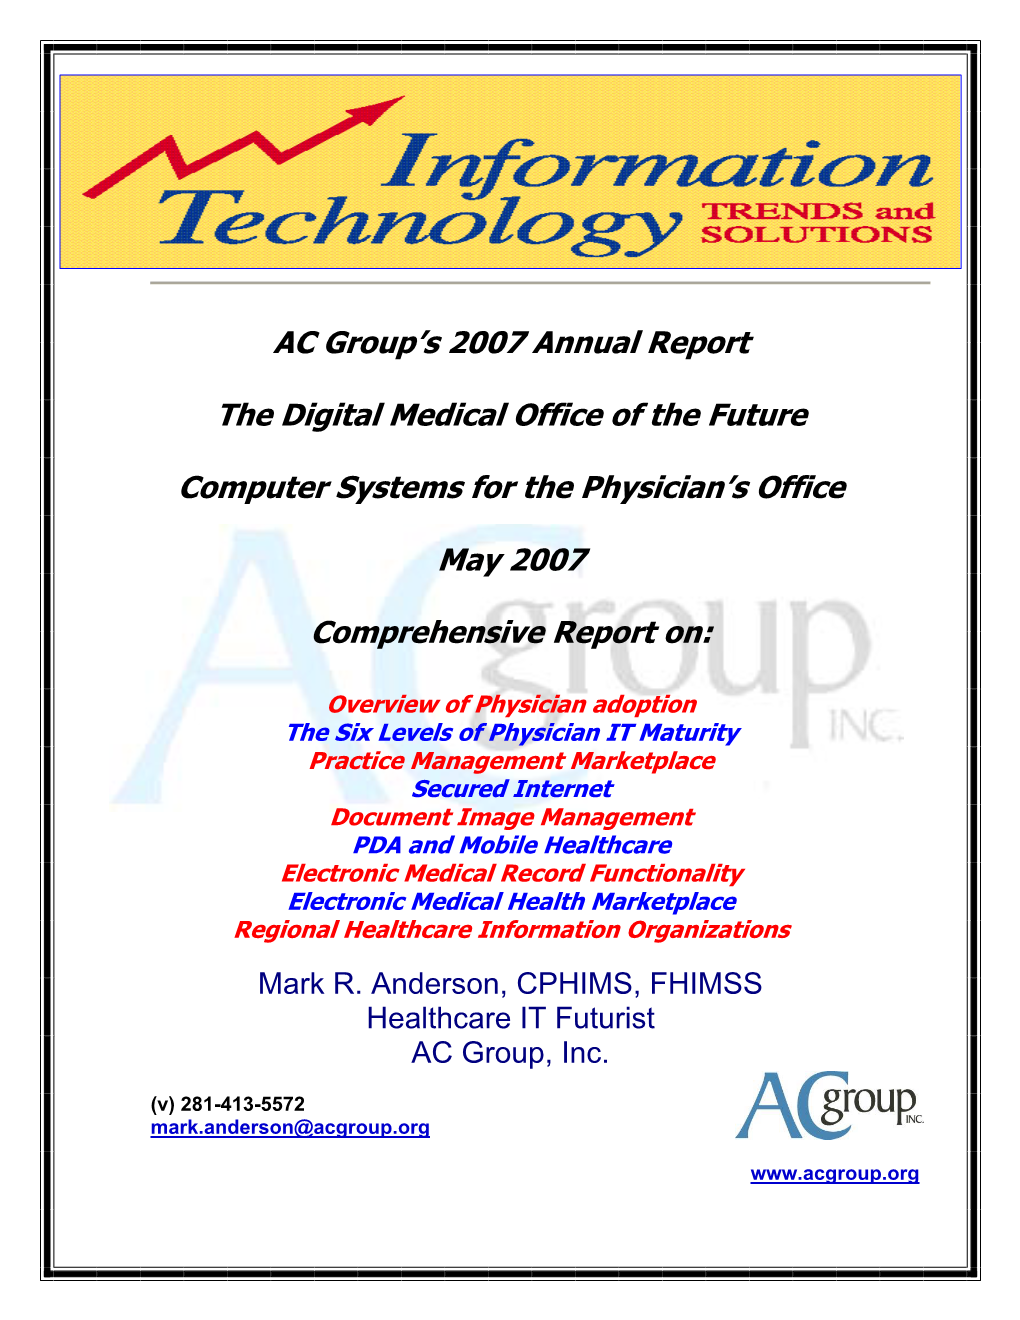 AC Group's 2007 Annual Report the Digital Medical Office of the Future